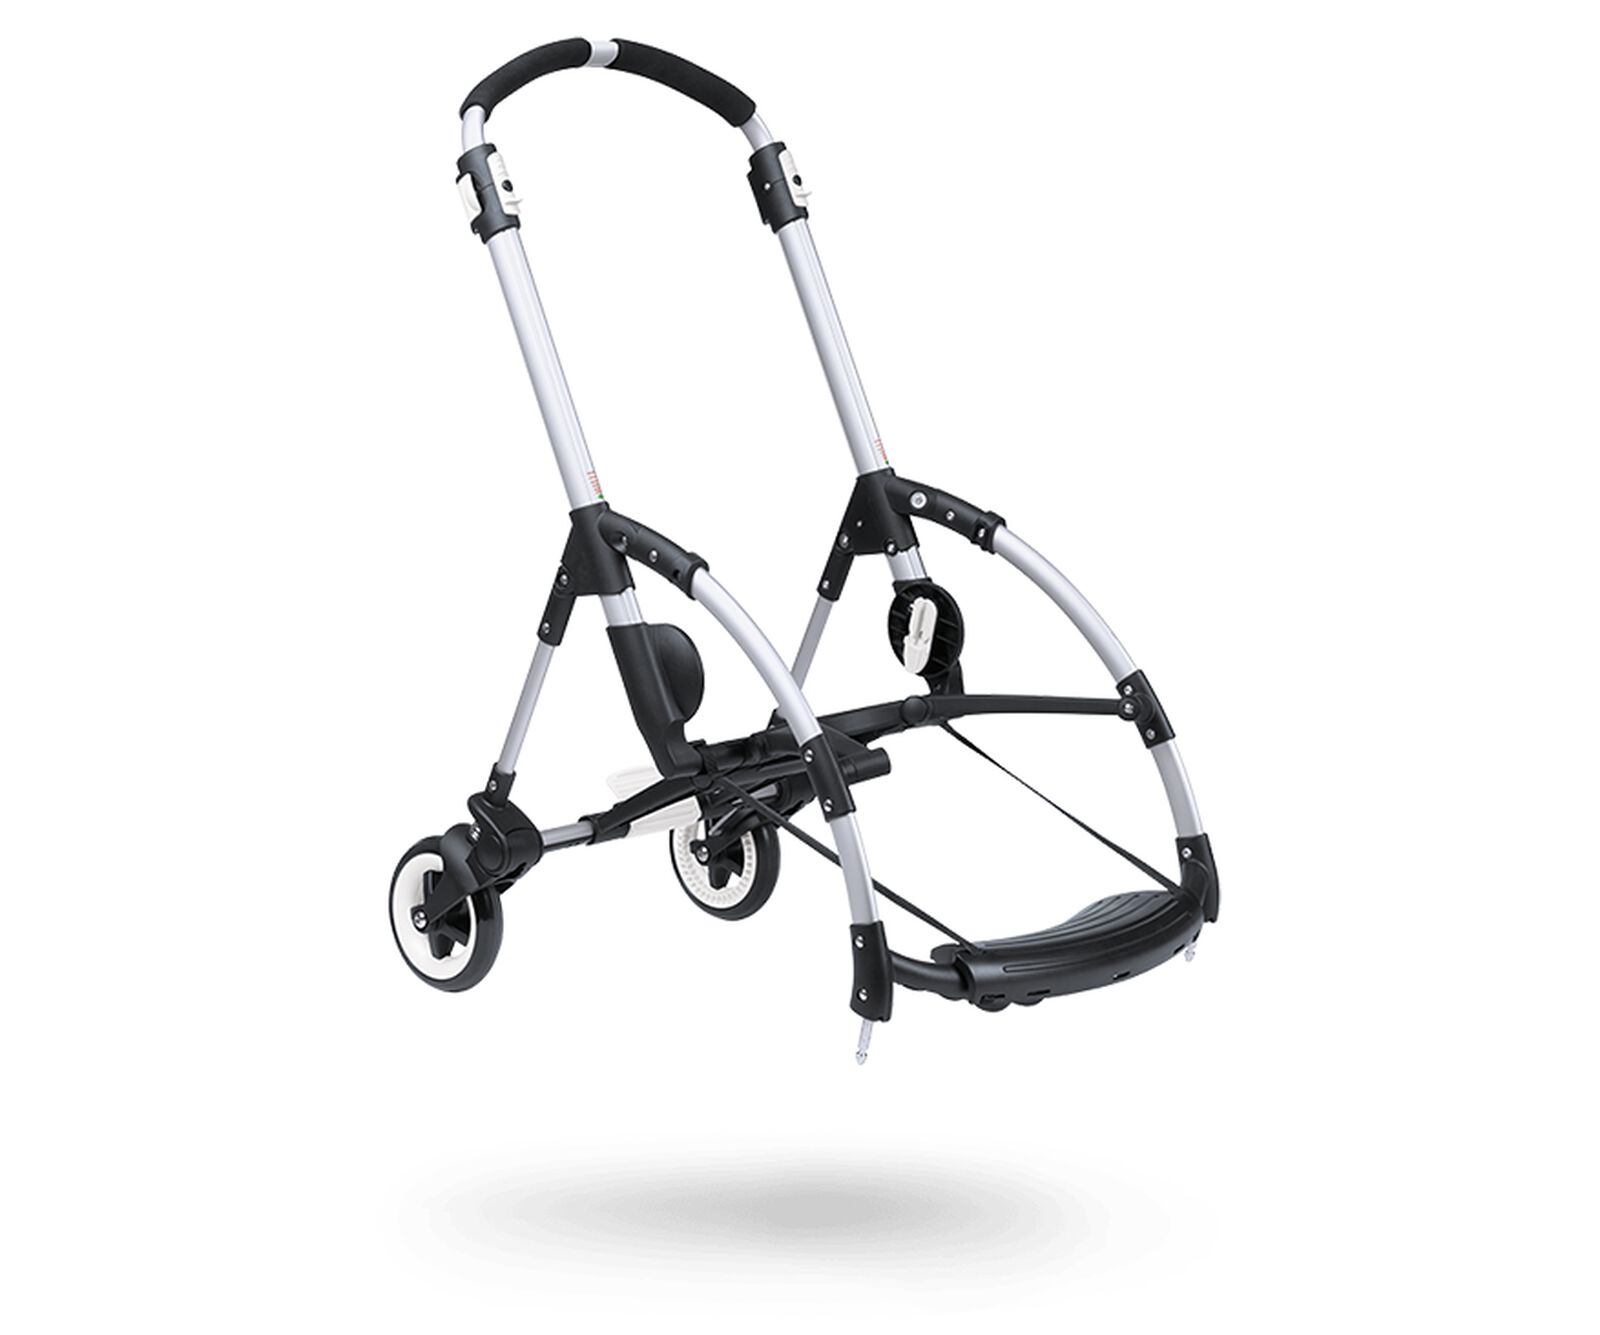 Bugaboo Bee 3 chassis - View 1